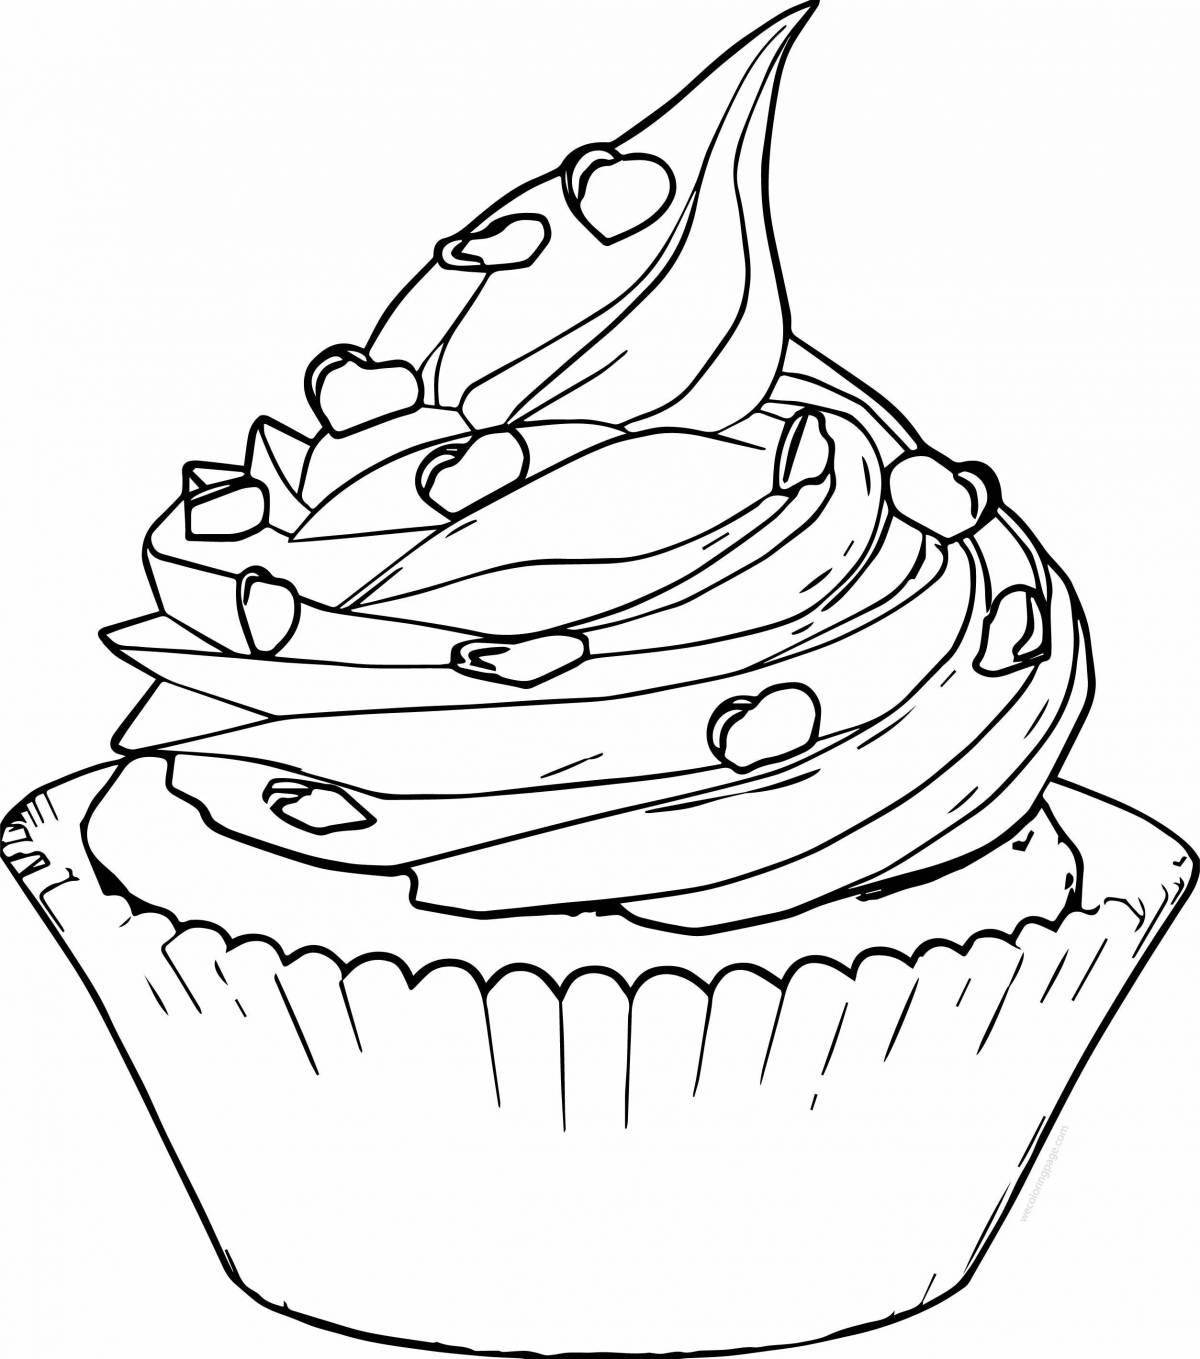 Awesome coloring pages for markers